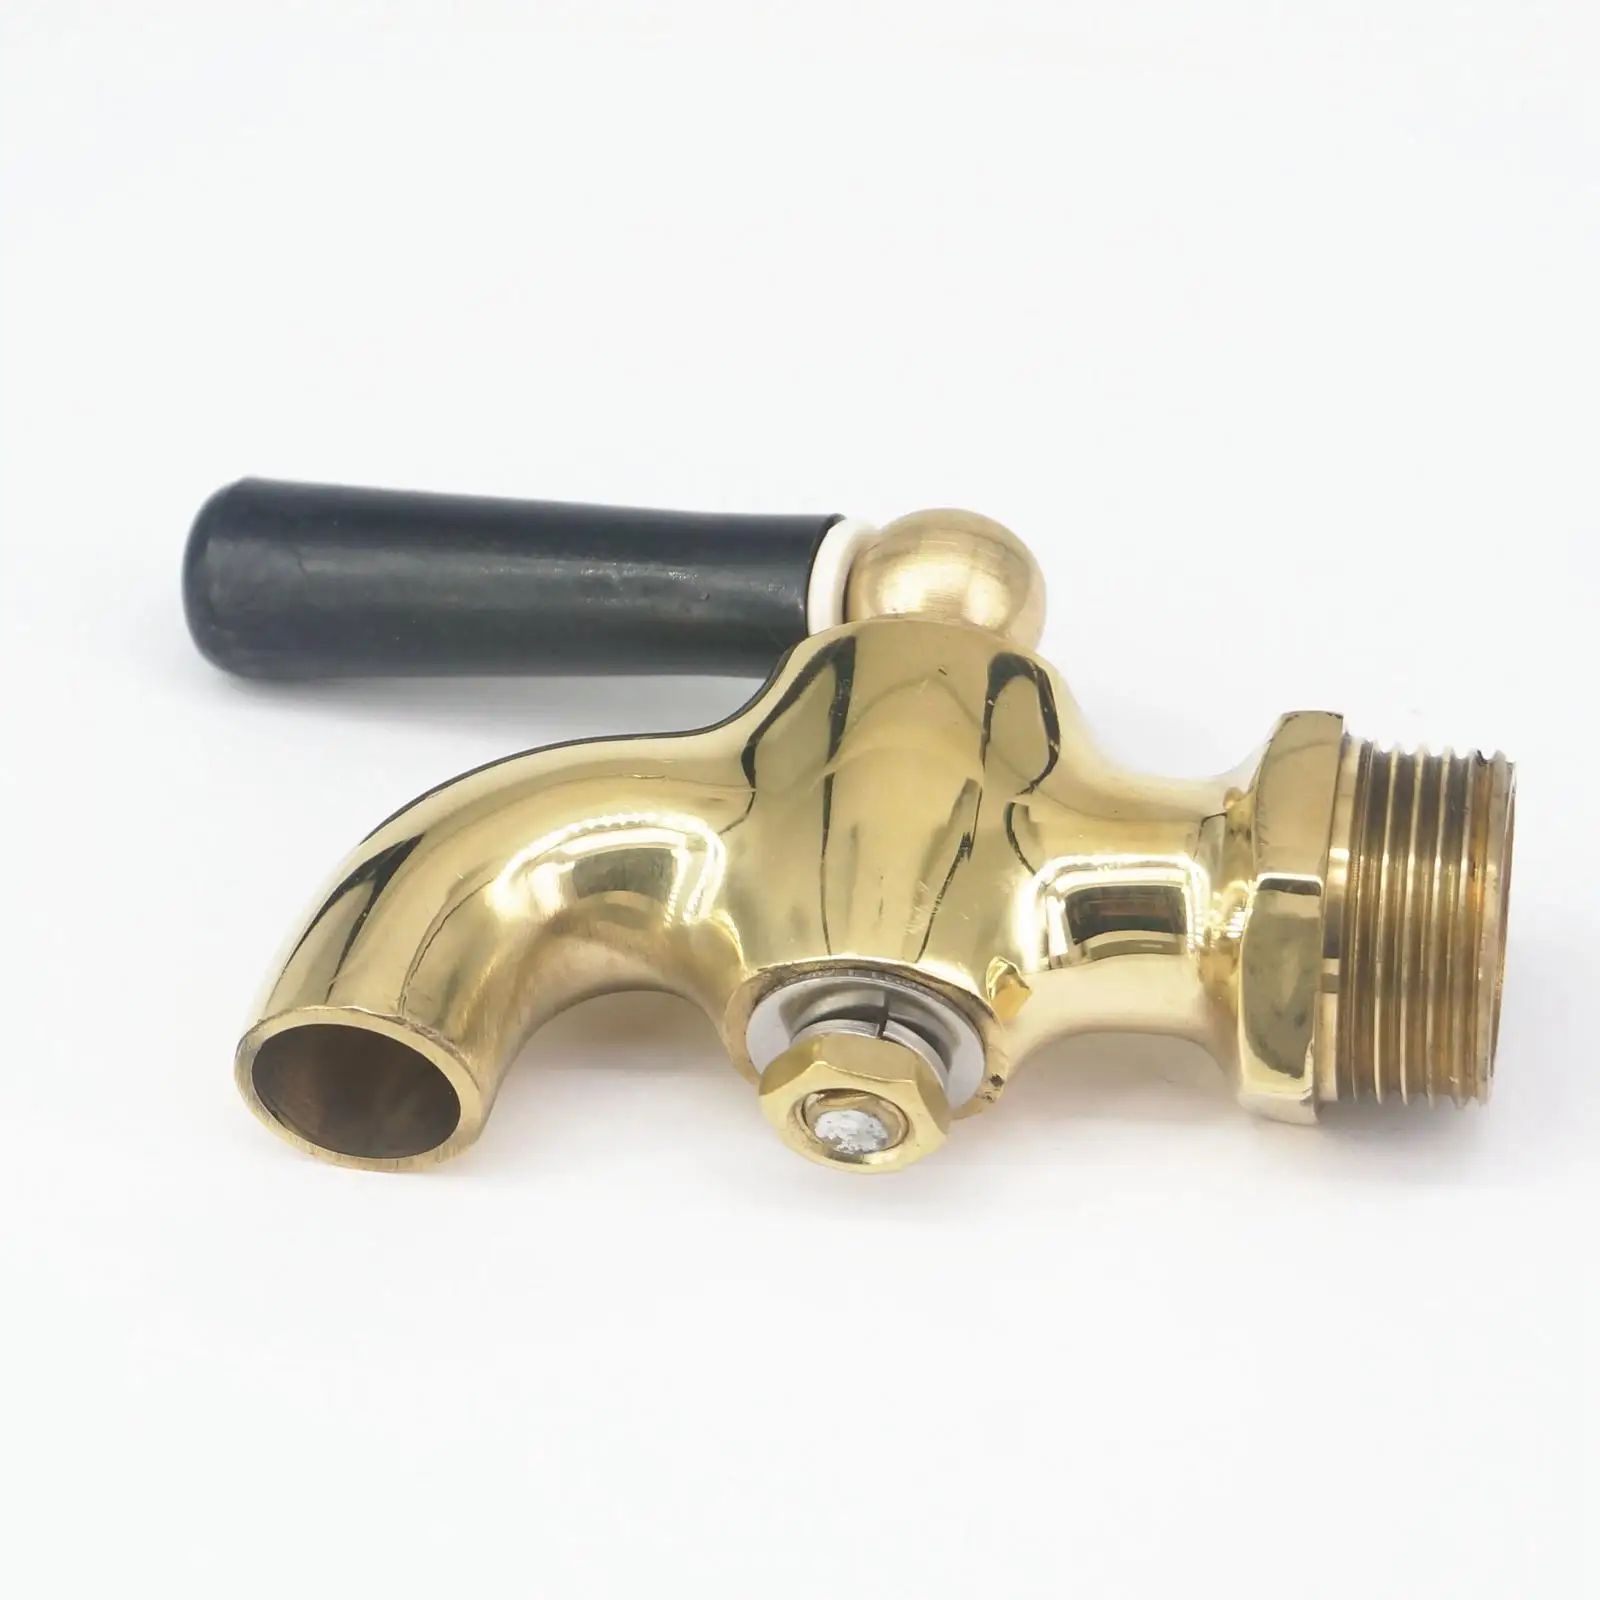 Details about   Bulk Hardware 1/2 inch BSP Water Taps with Brass Wall Plate Fixture BS1010-2 . 